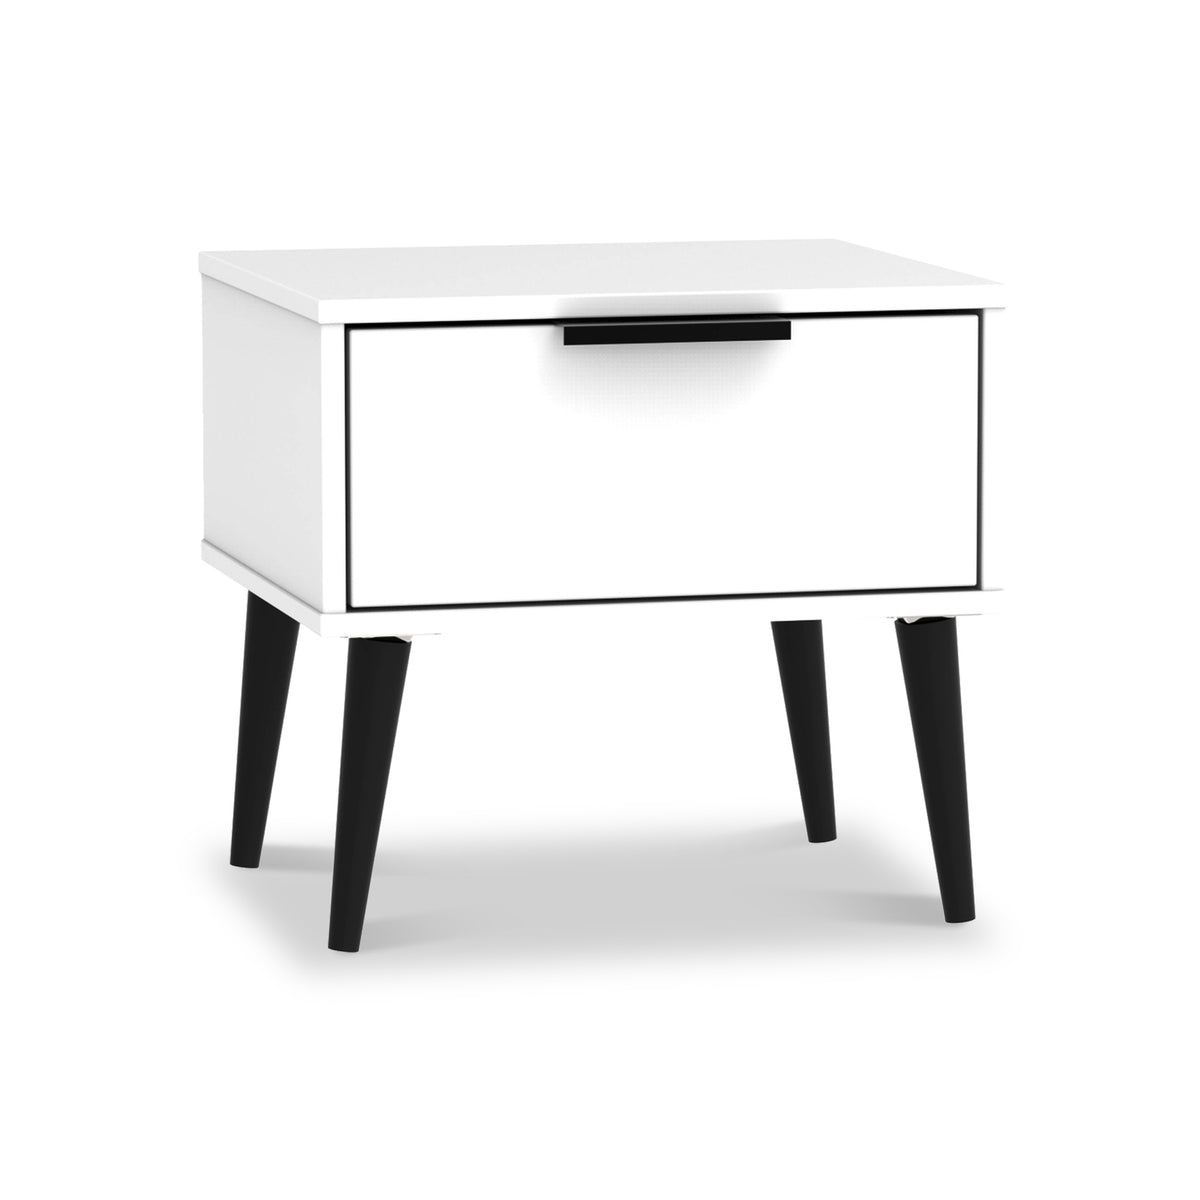 Asher White 1 Drawer Bedside Table from Roseland